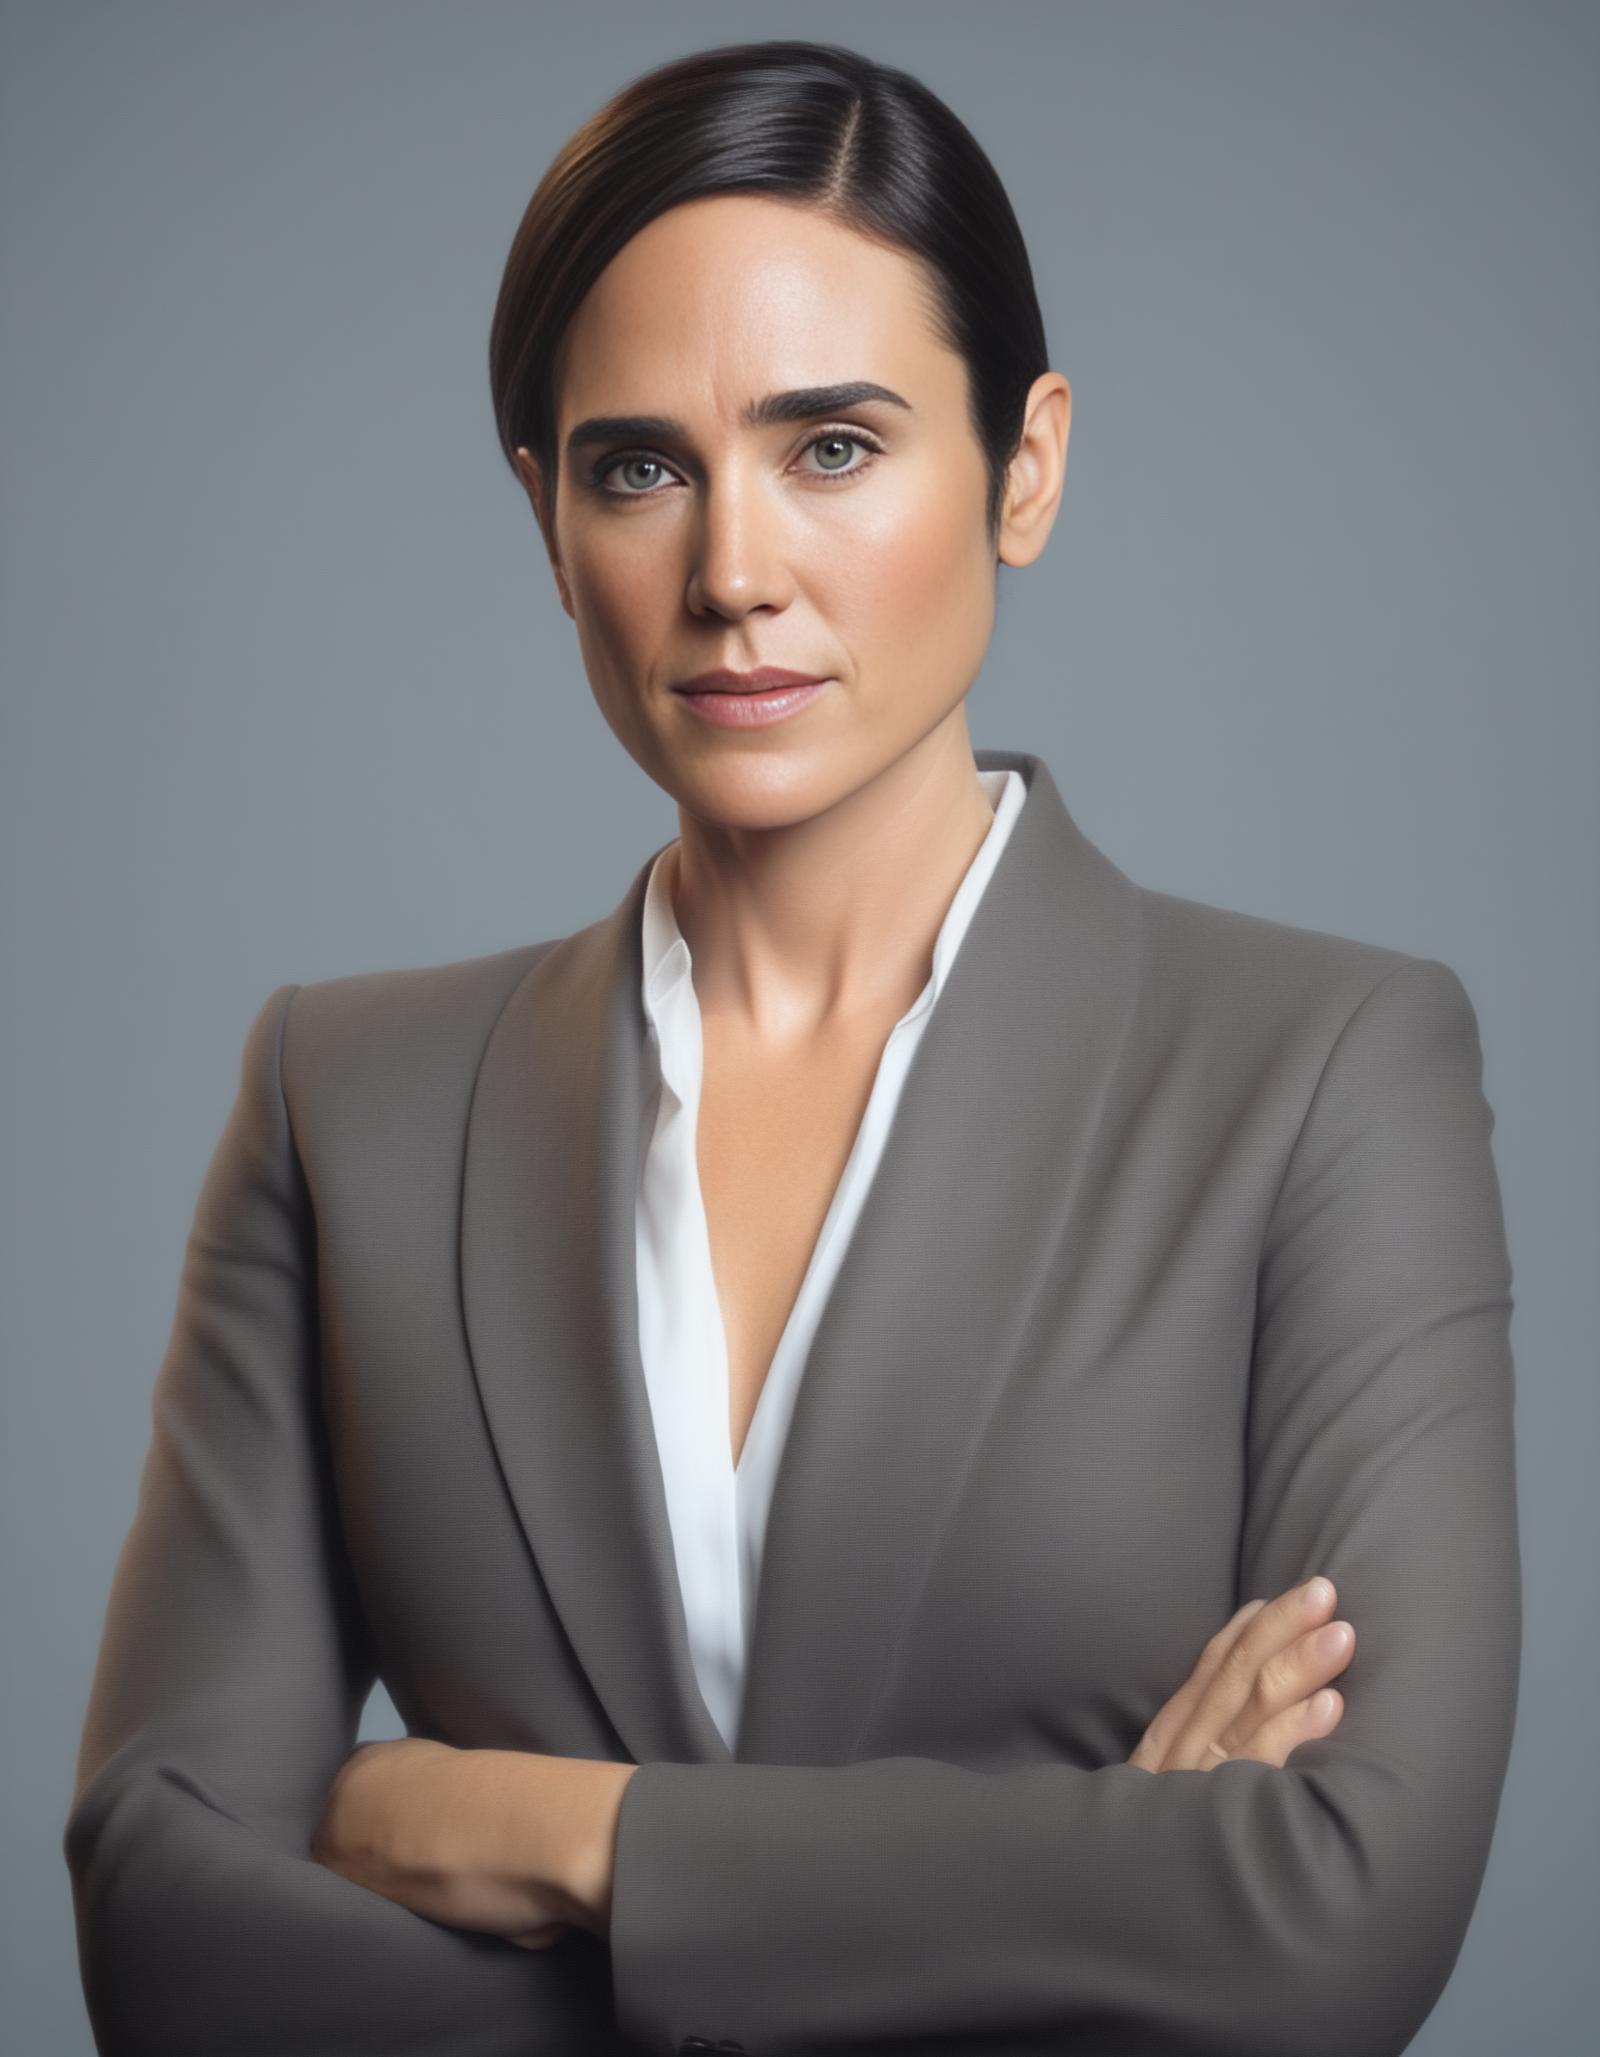 Jennifer Connelly image by parar20